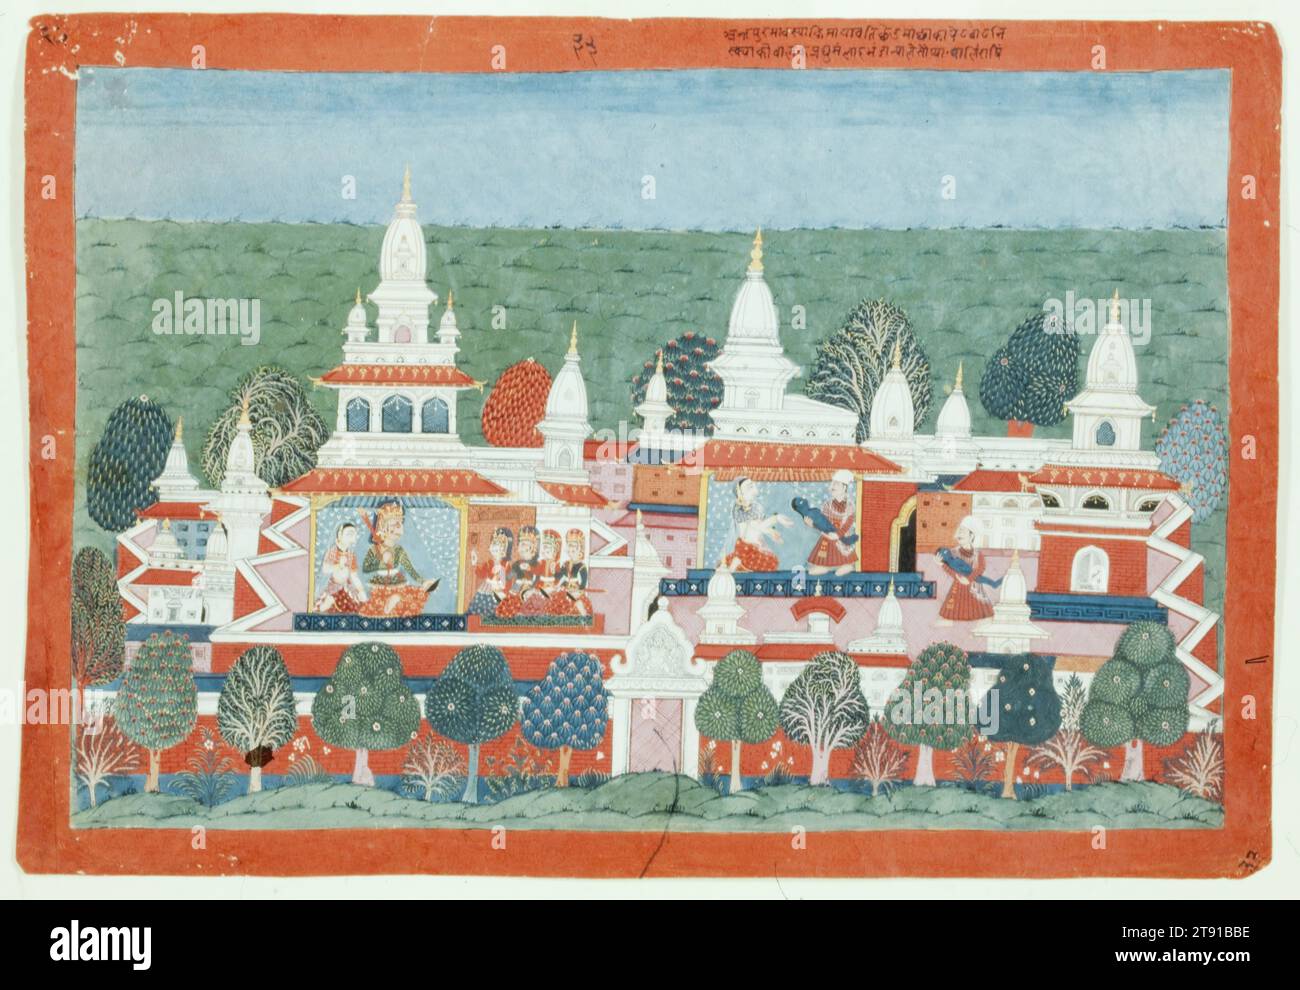 The Story of Pradyumna’s Birth, c. 1775, 12 3/4 x 19 1/4 in. (32.39 x 48.9 cm), Opaque watercolors on paper, Nepal, 18th century, Beginning in the mid-seventeenth century, the Nepalese royalty of the Kathmandu Valley became increasingly interested in Rajput paintings from India. Originally influenced by the Malwa and Kangra schools, Nepalese artists nevertheless developed an original spatial sense that utilized bird’s-eye views and multiple perspective Stock Photo